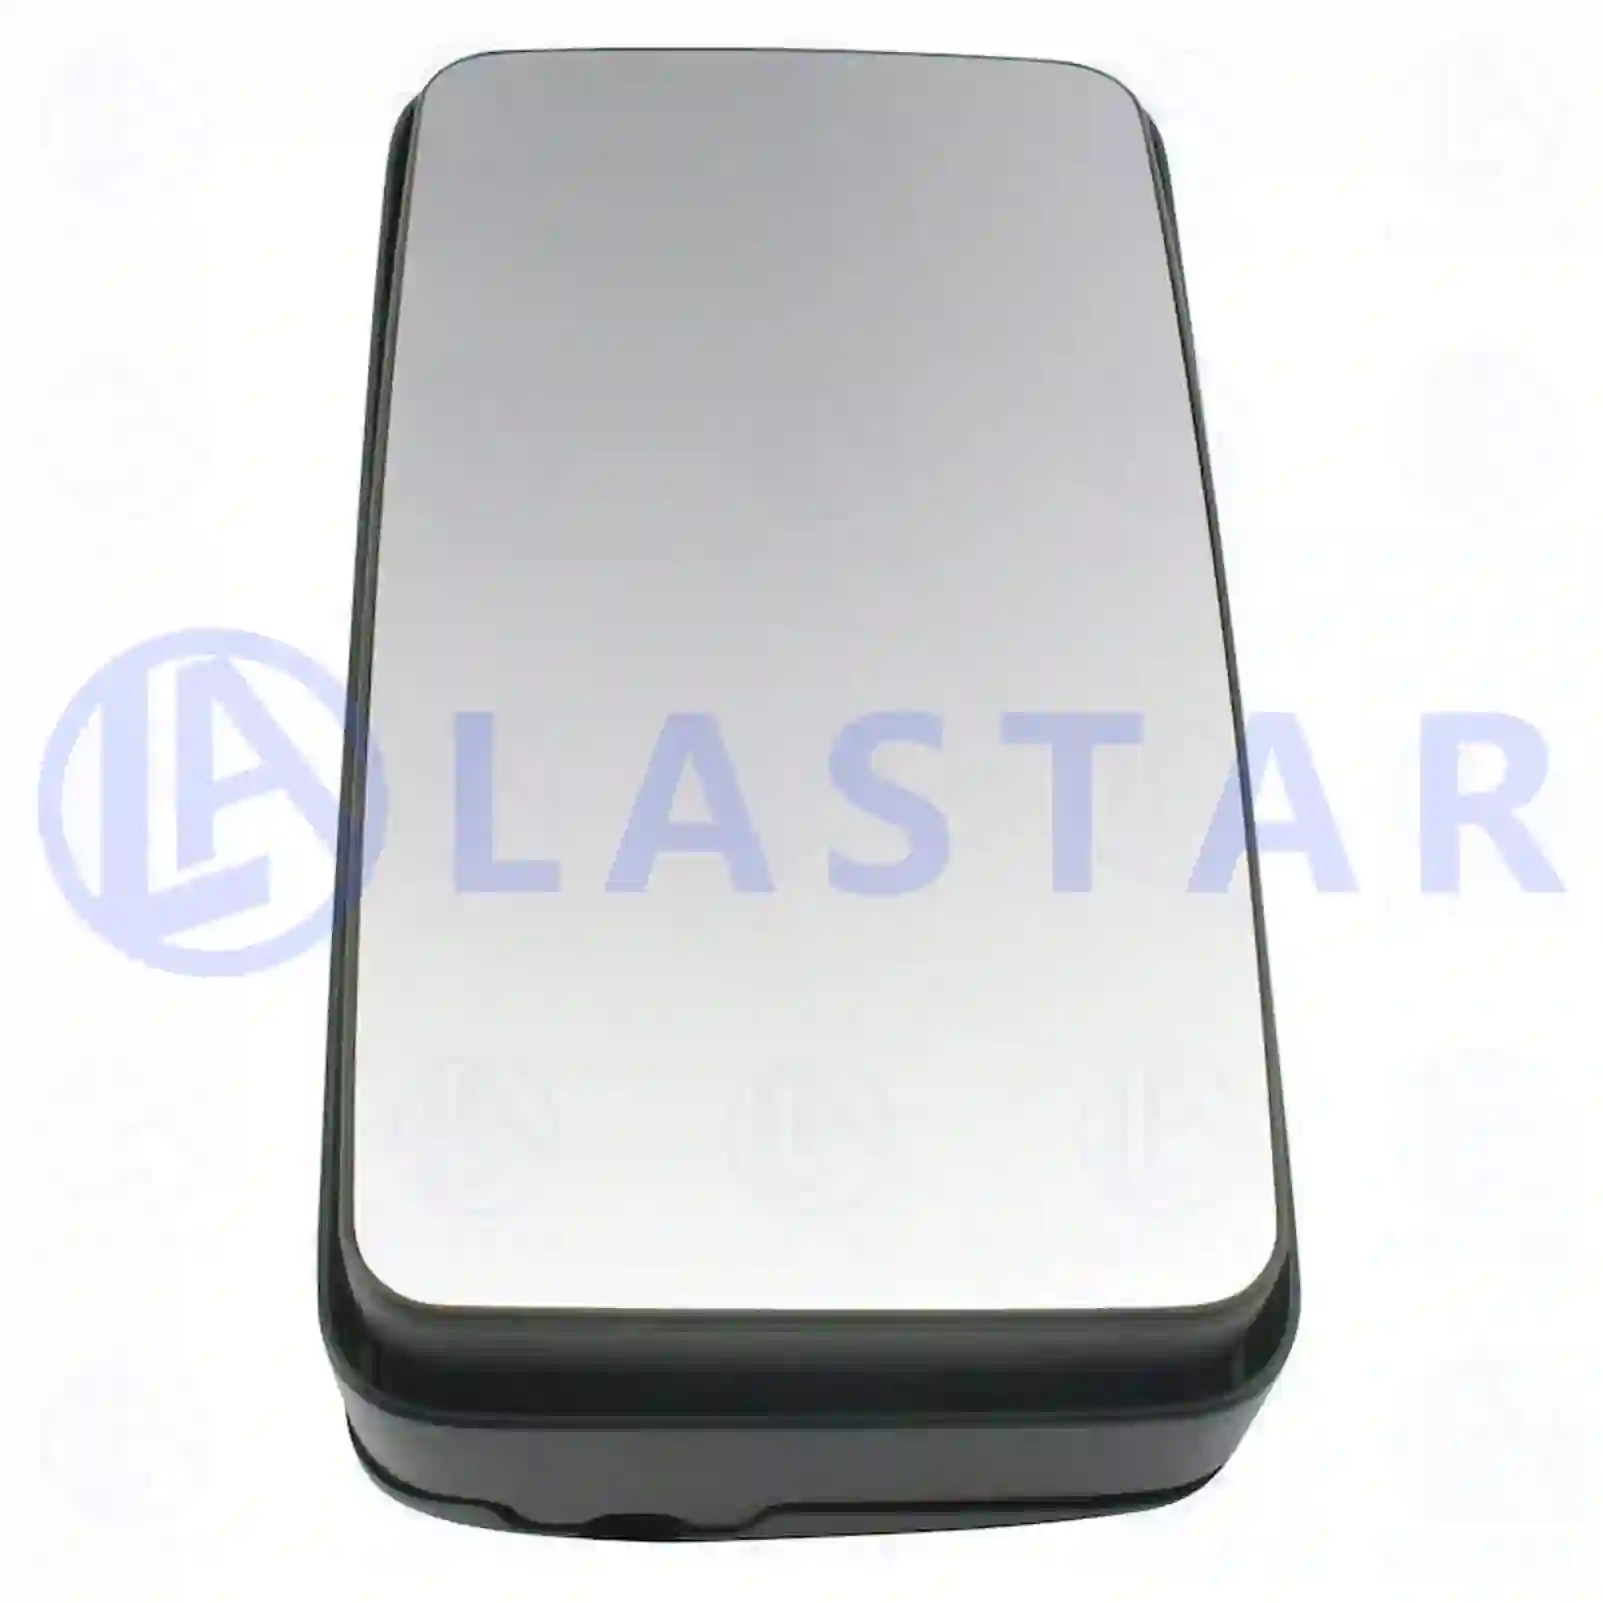 Main mirror, heated, electrical, 77719960, 1425105, 1610184 ||  77719960 Lastar Spare Part | Truck Spare Parts, Auotomotive Spare Parts Main mirror, heated, electrical, 77719960, 1425105, 1610184 ||  77719960 Lastar Spare Part | Truck Spare Parts, Auotomotive Spare Parts